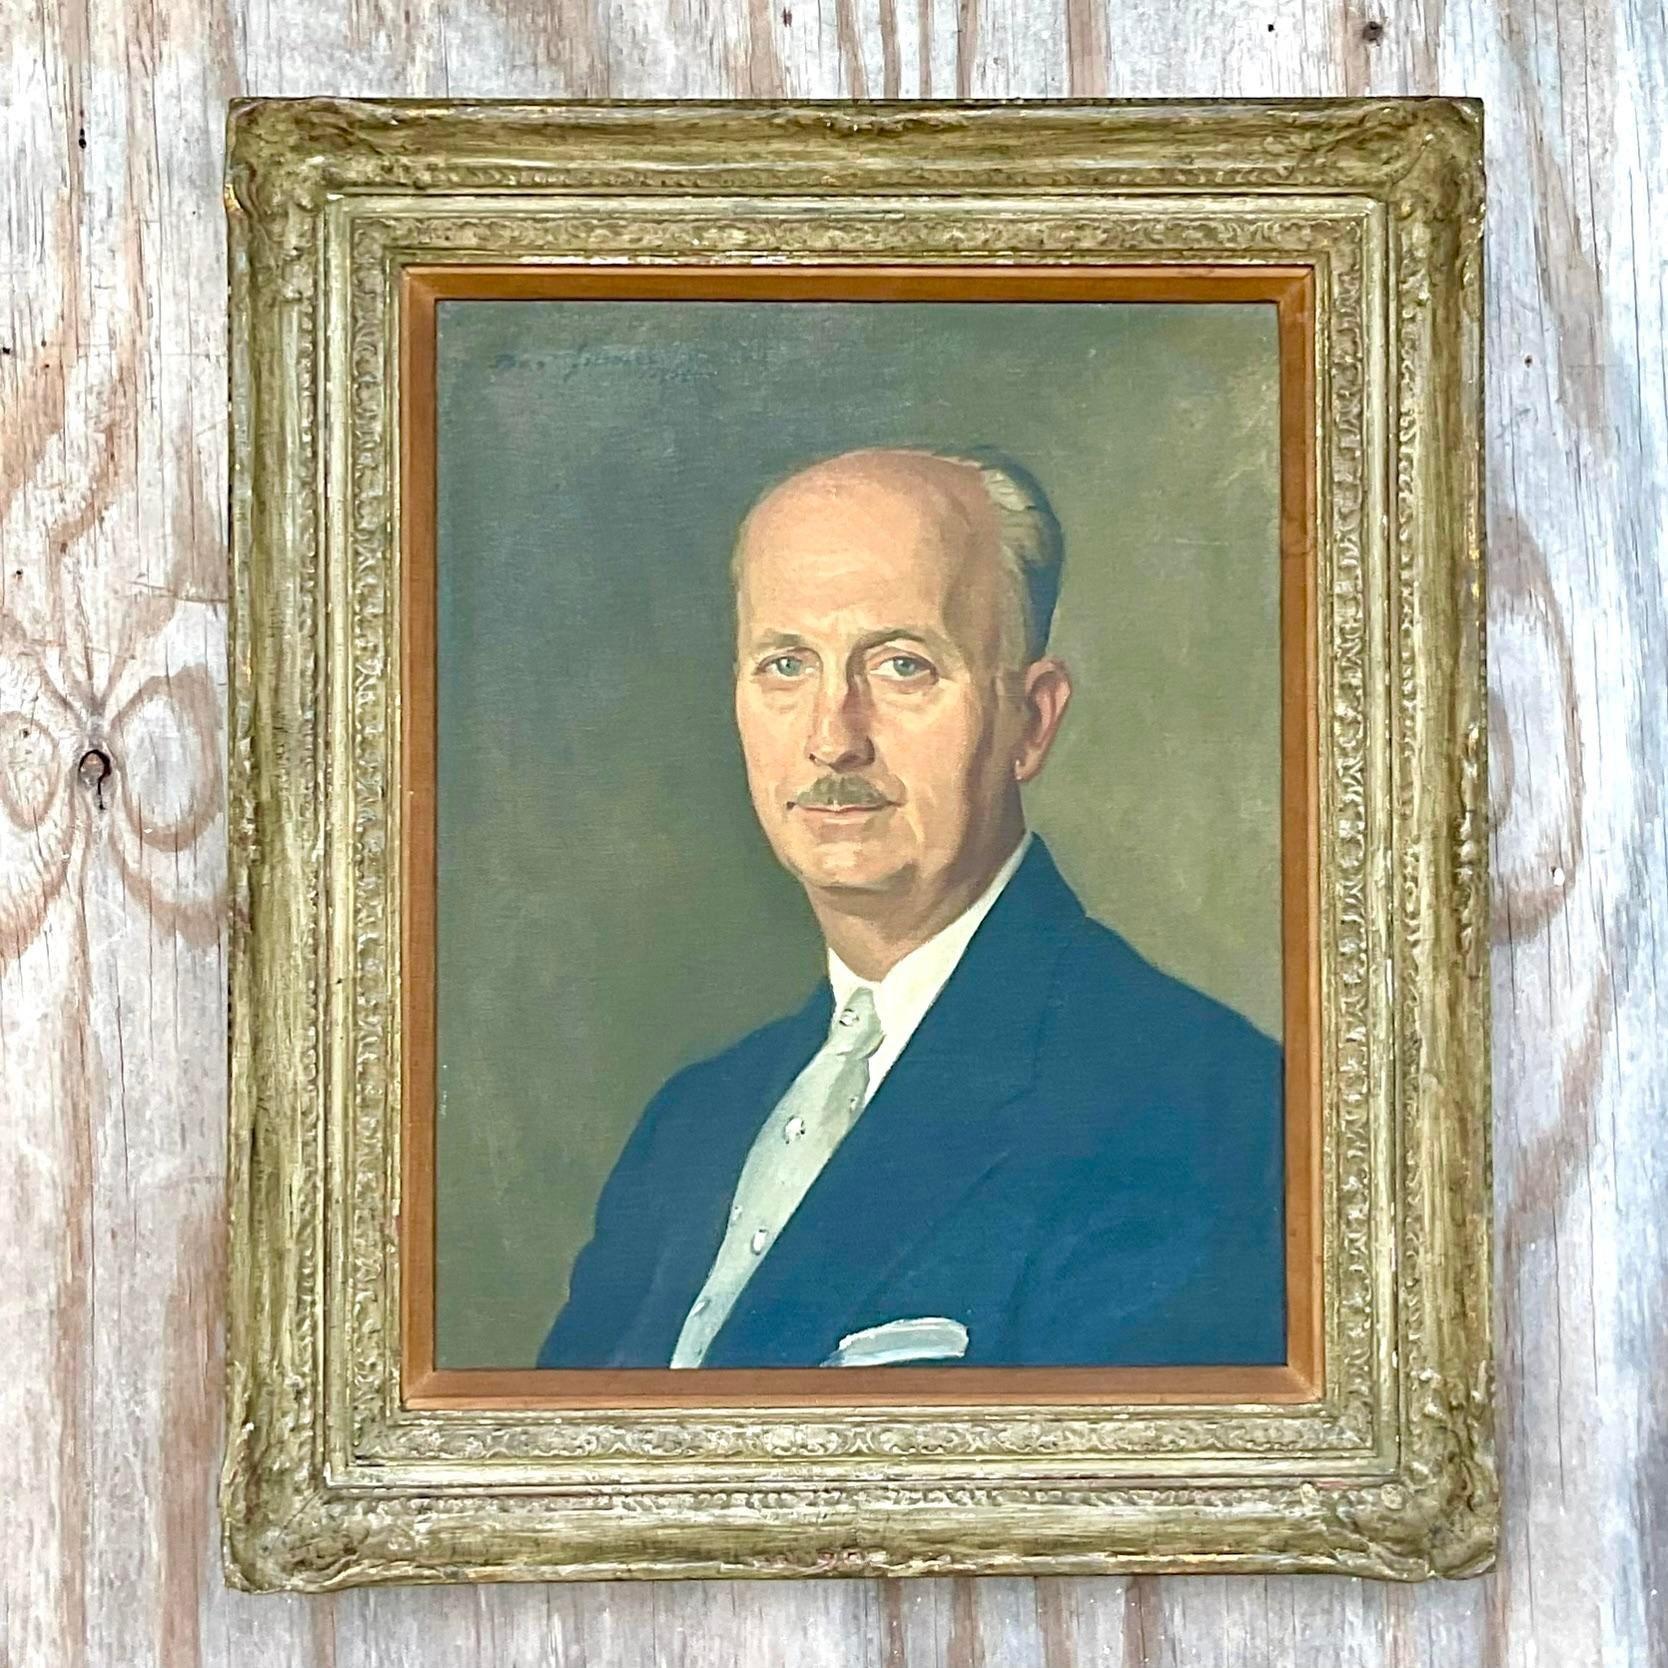 A fabulous vintage Regency original oil portrait. A chic 1954 composition signed by the artist. A masterful work on canvas with the original frame. Acquired from a PA estate.